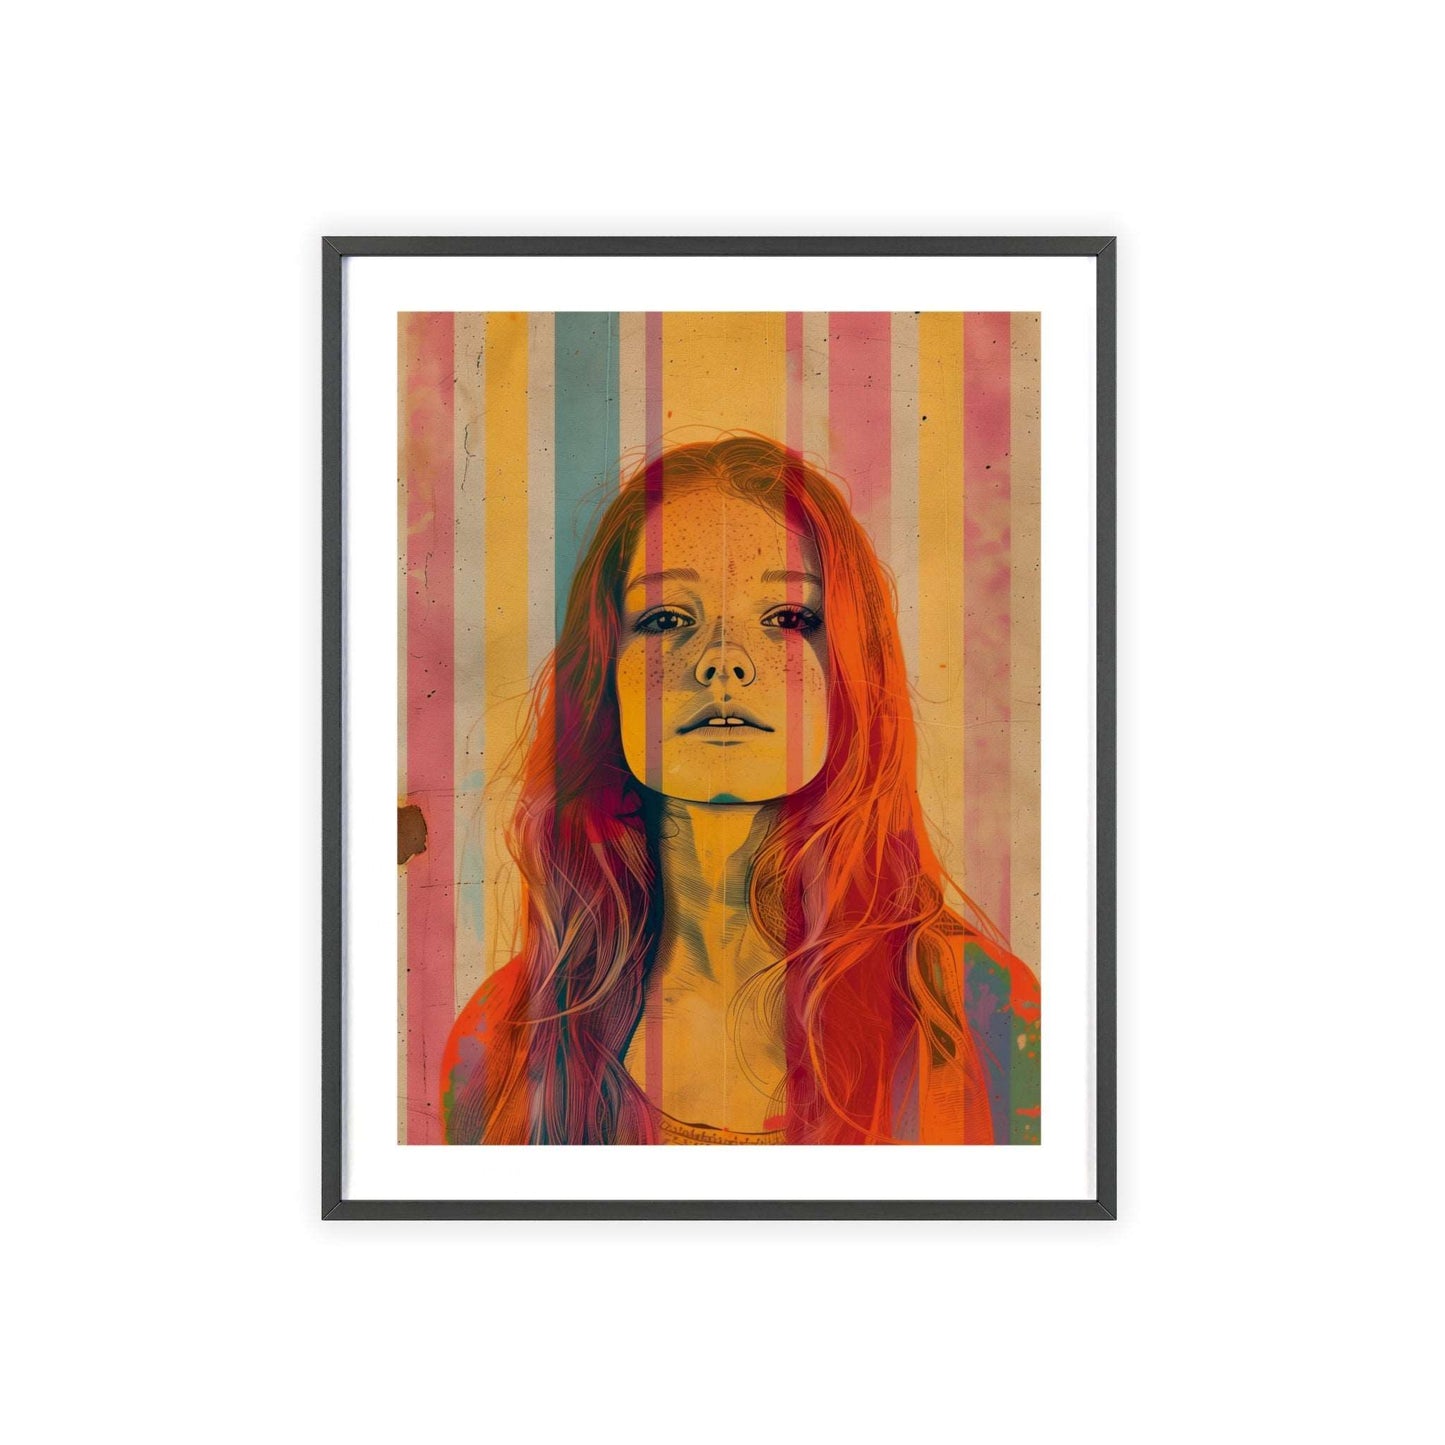 Pop art portrait of an iconic European woman from the Global Glamour collection, enhancing modern home decor with exquisite beauty.